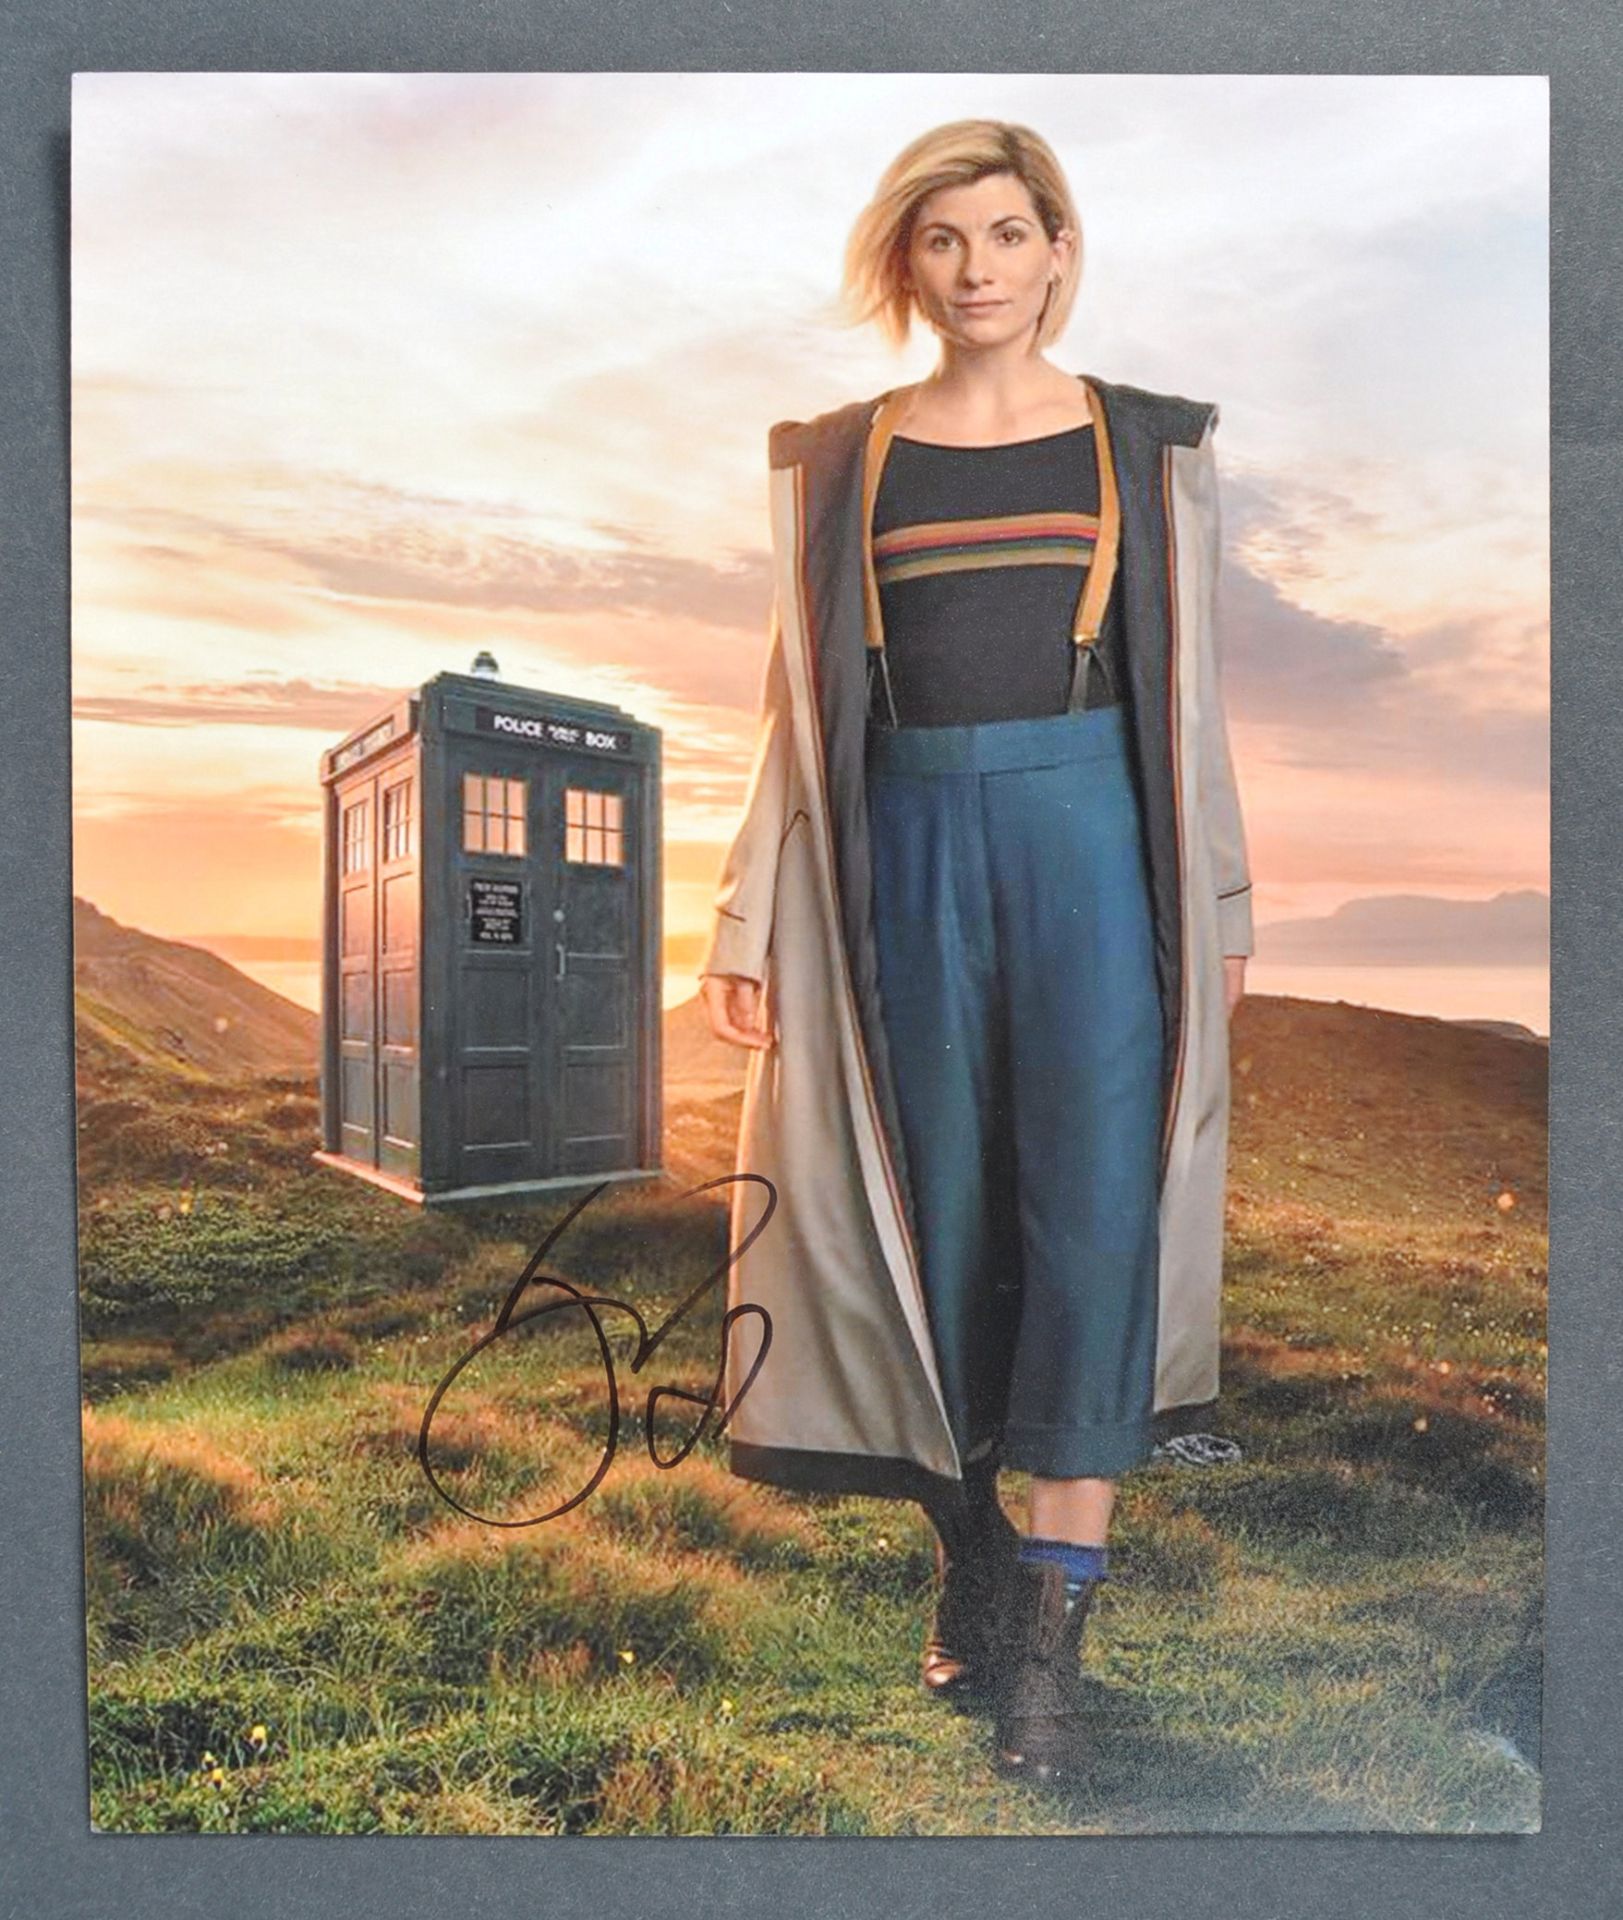 JODIE WHITTAKER - DOCTOR WHO - AUTOGRAPHED 8X10" PHOTOGRAPH